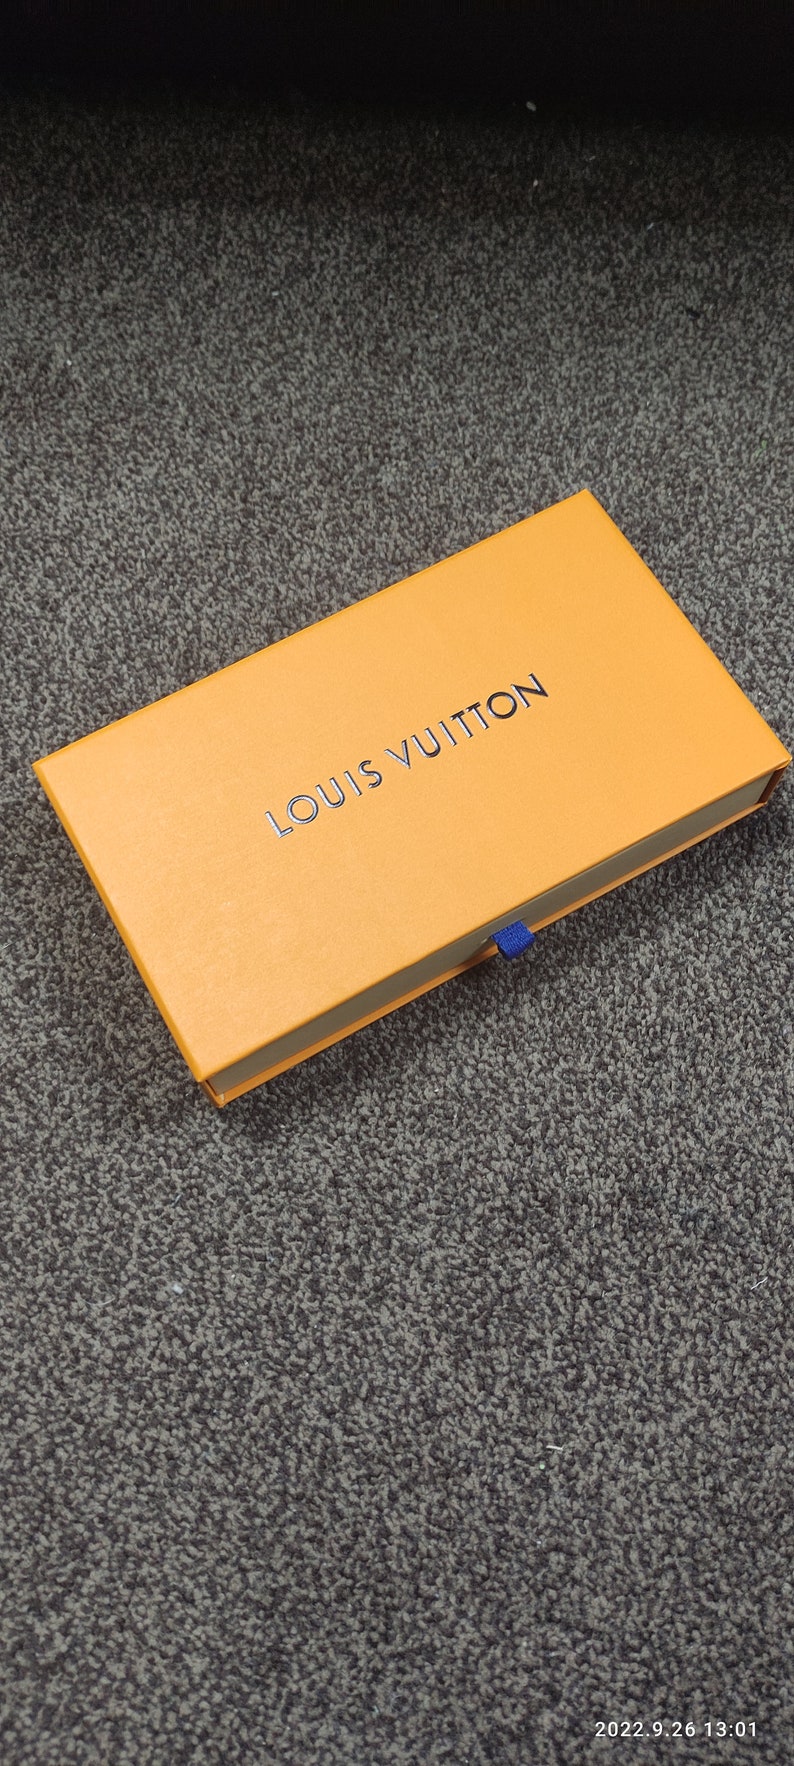 LOUIS VUITTON HAUL /UNBOXING /CHRISTMAS HOLIDAY 2021 PACKAGING